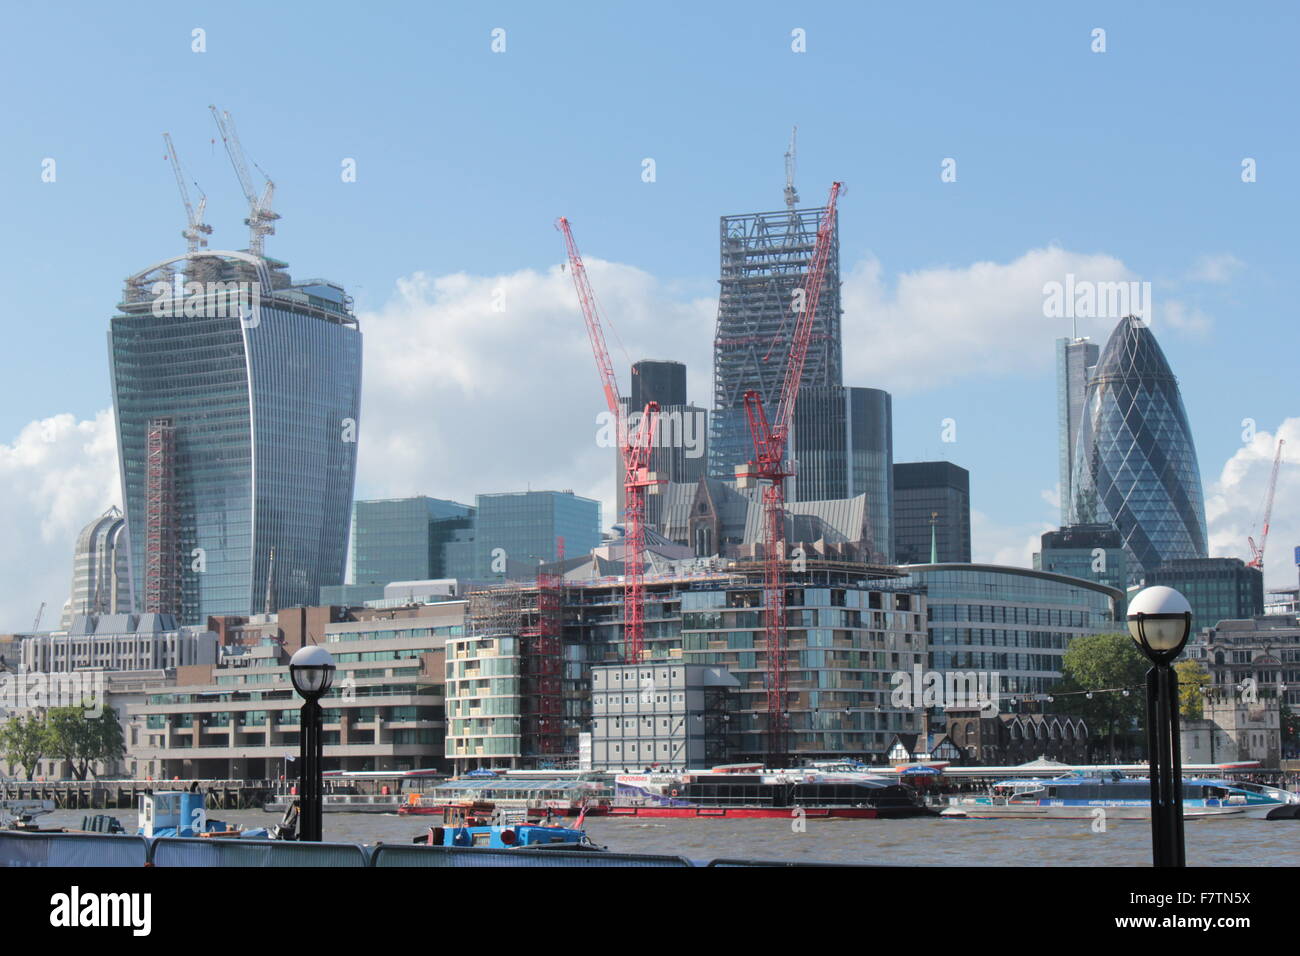 Walkie Talkie, Gherkin and Cheesegrater  Skyscrapers under construction Stock Photo